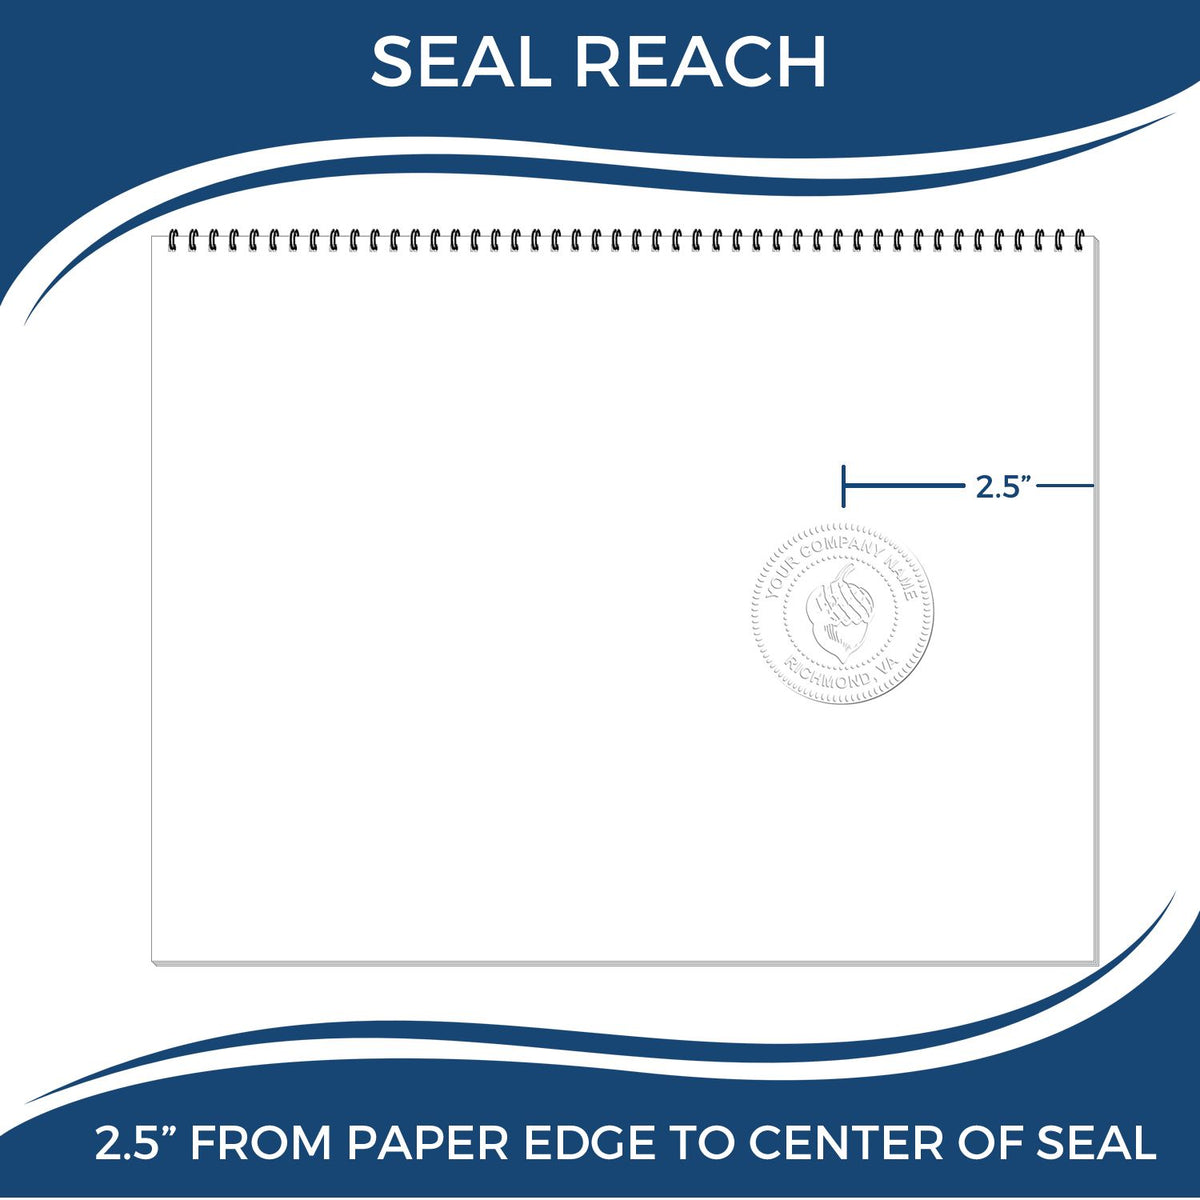 An infographic showing the seal reach which is represented by a ruler and a miniature seal image of the Heavy Duty Cast Iron District of Columbia Land Surveyor Seal Embosser